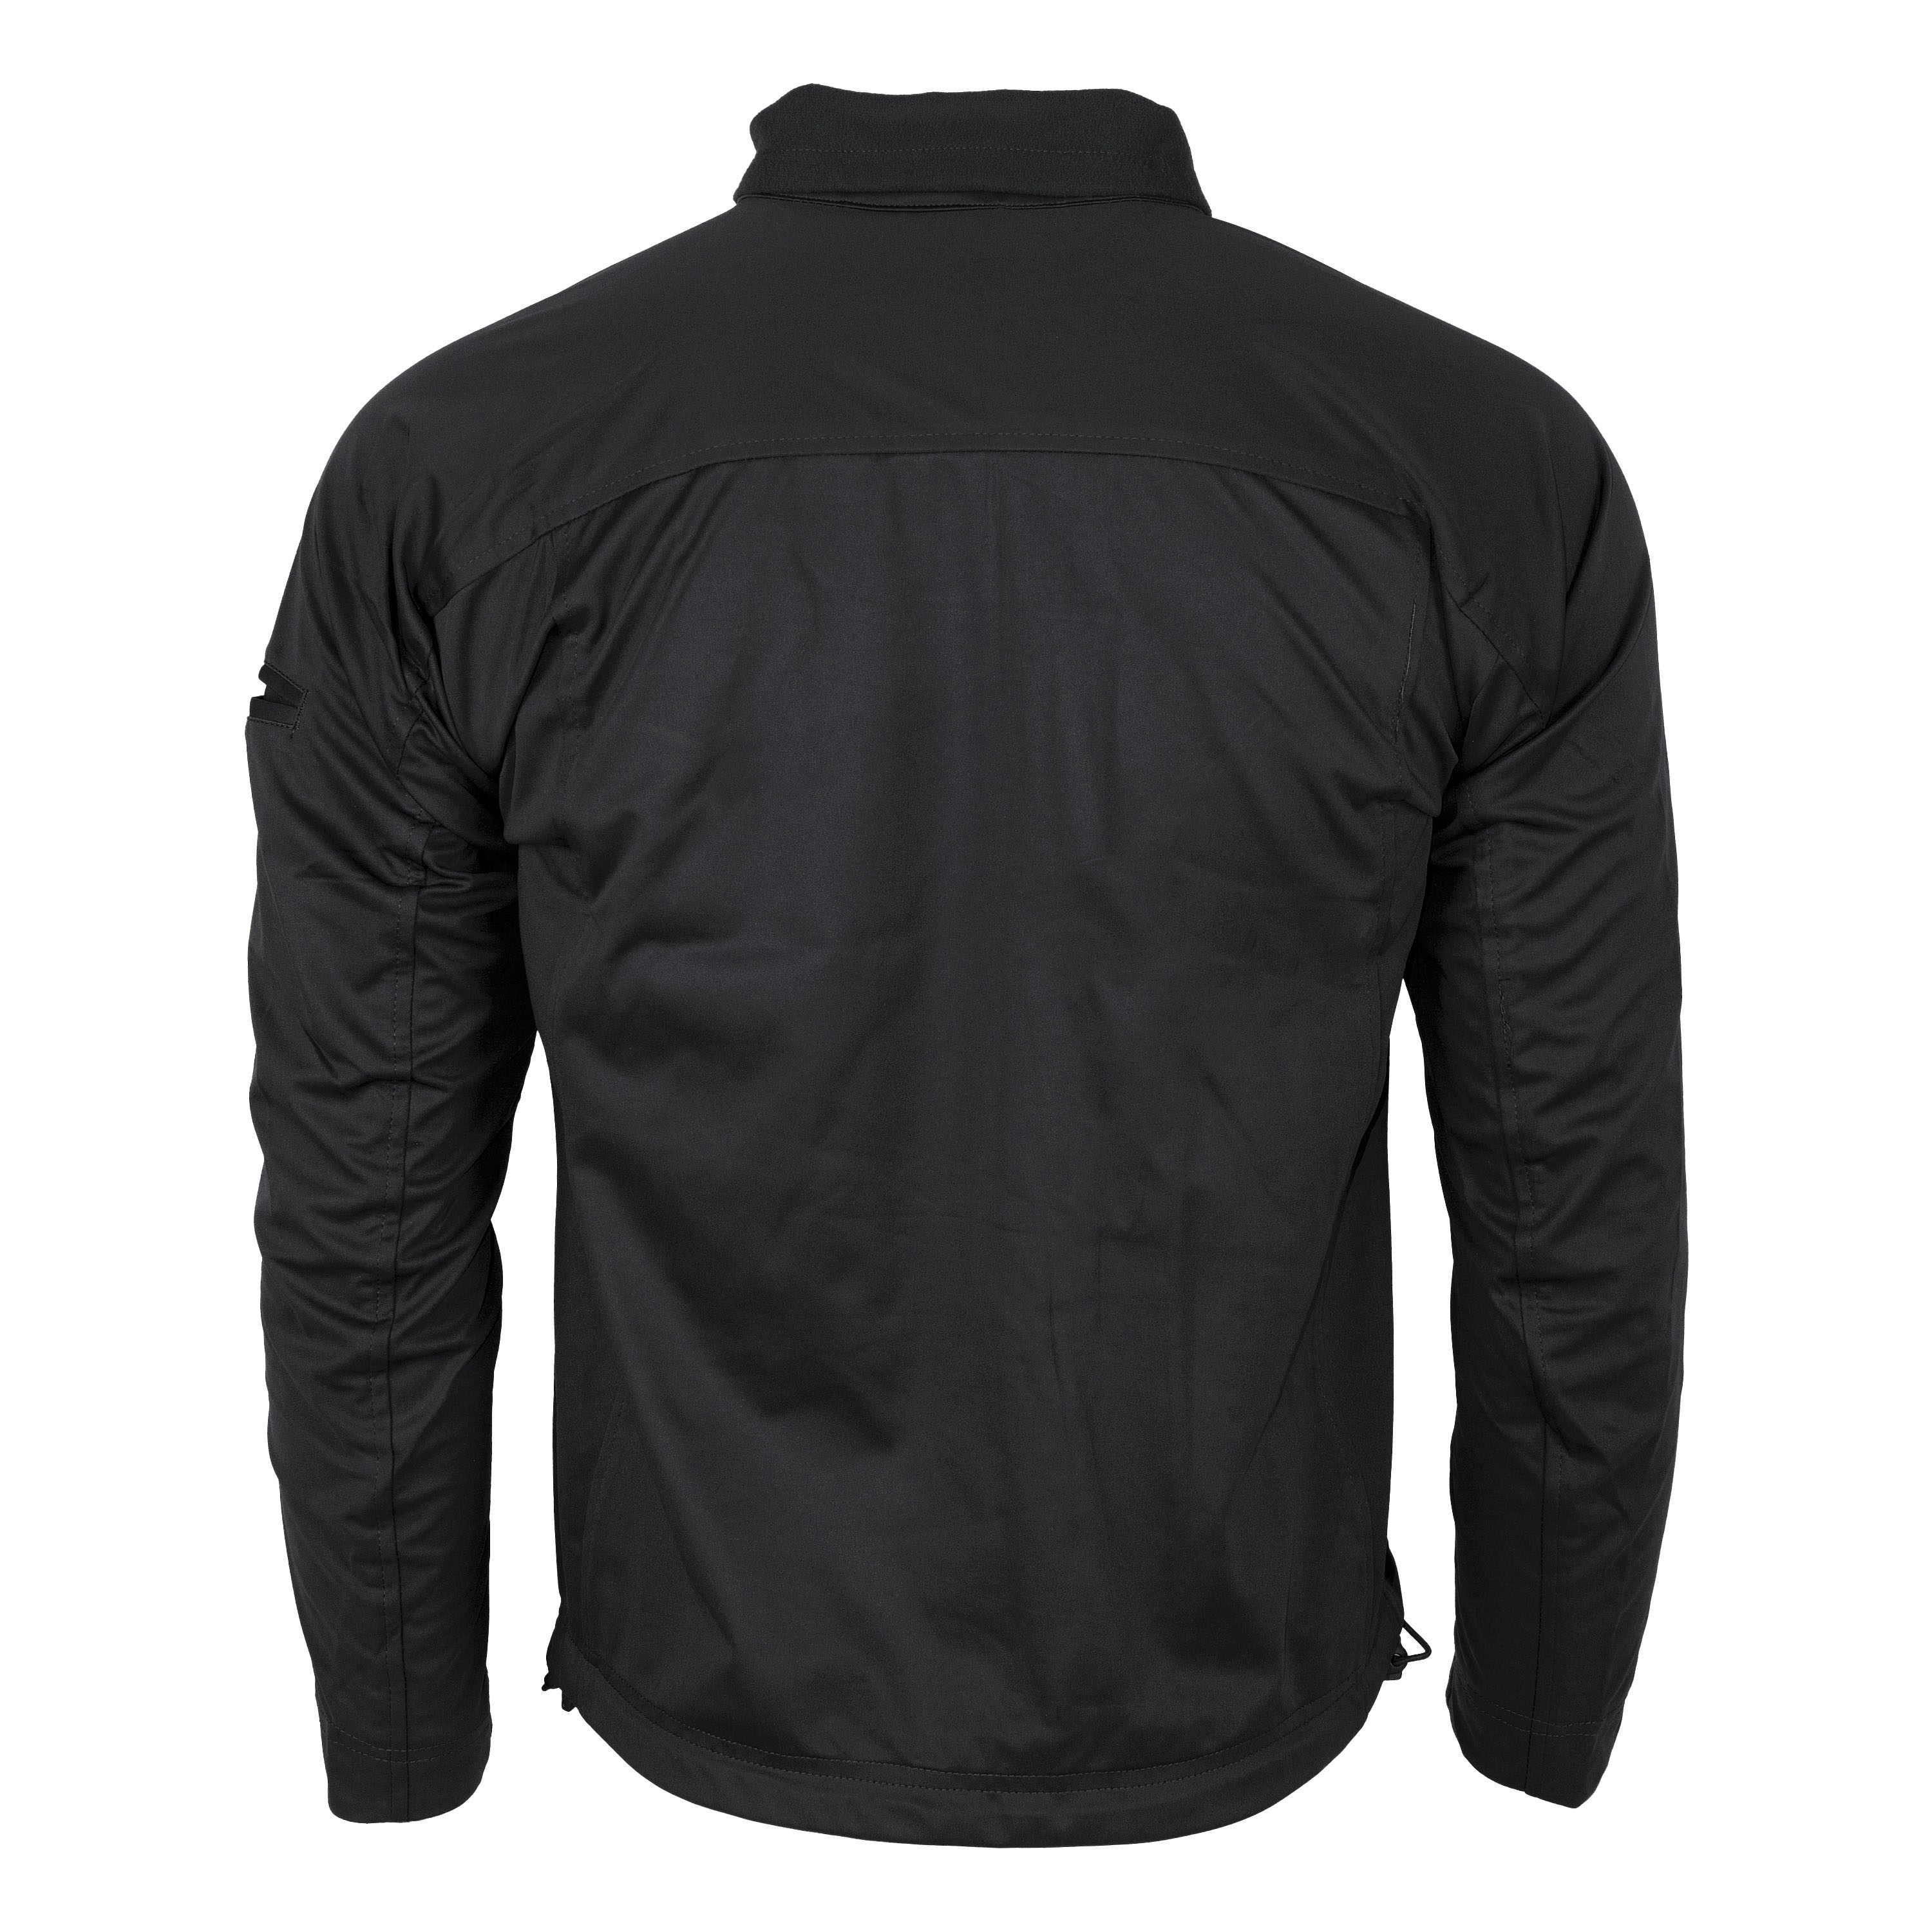 Purchase the Mil-Tec Softshell-Jacket Lightweight black by ASMC